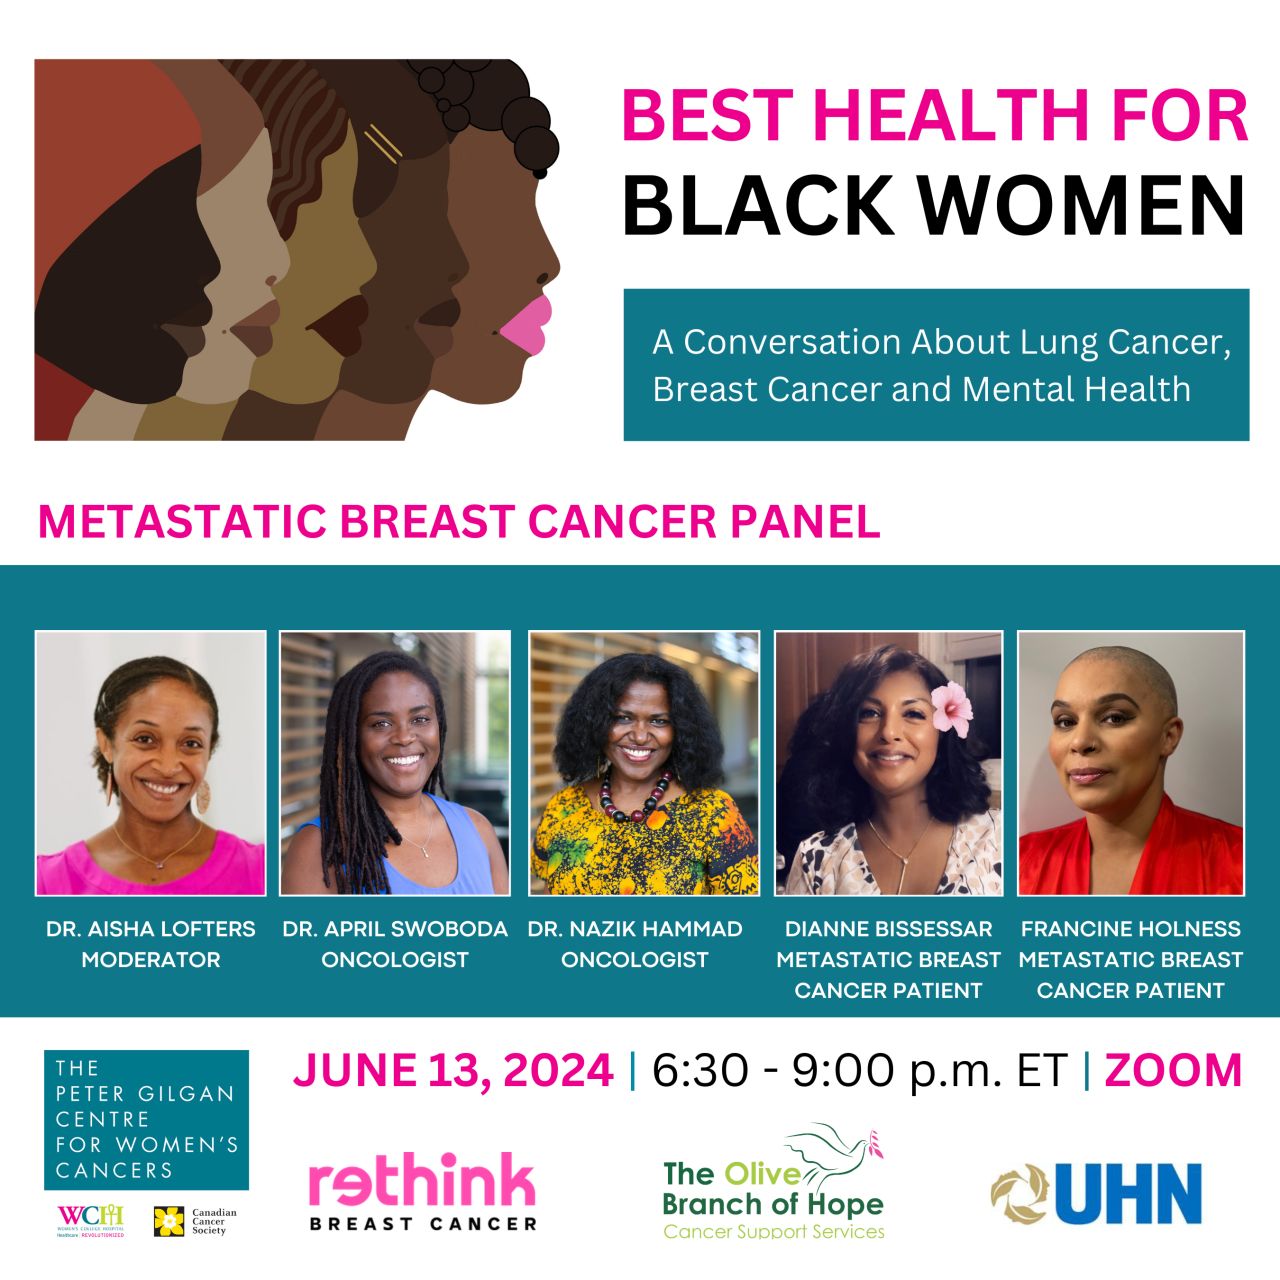 Women’s College Hospital – Introducing the Breast Cancer panel at the 2024 Best Health for Black Women virtual event